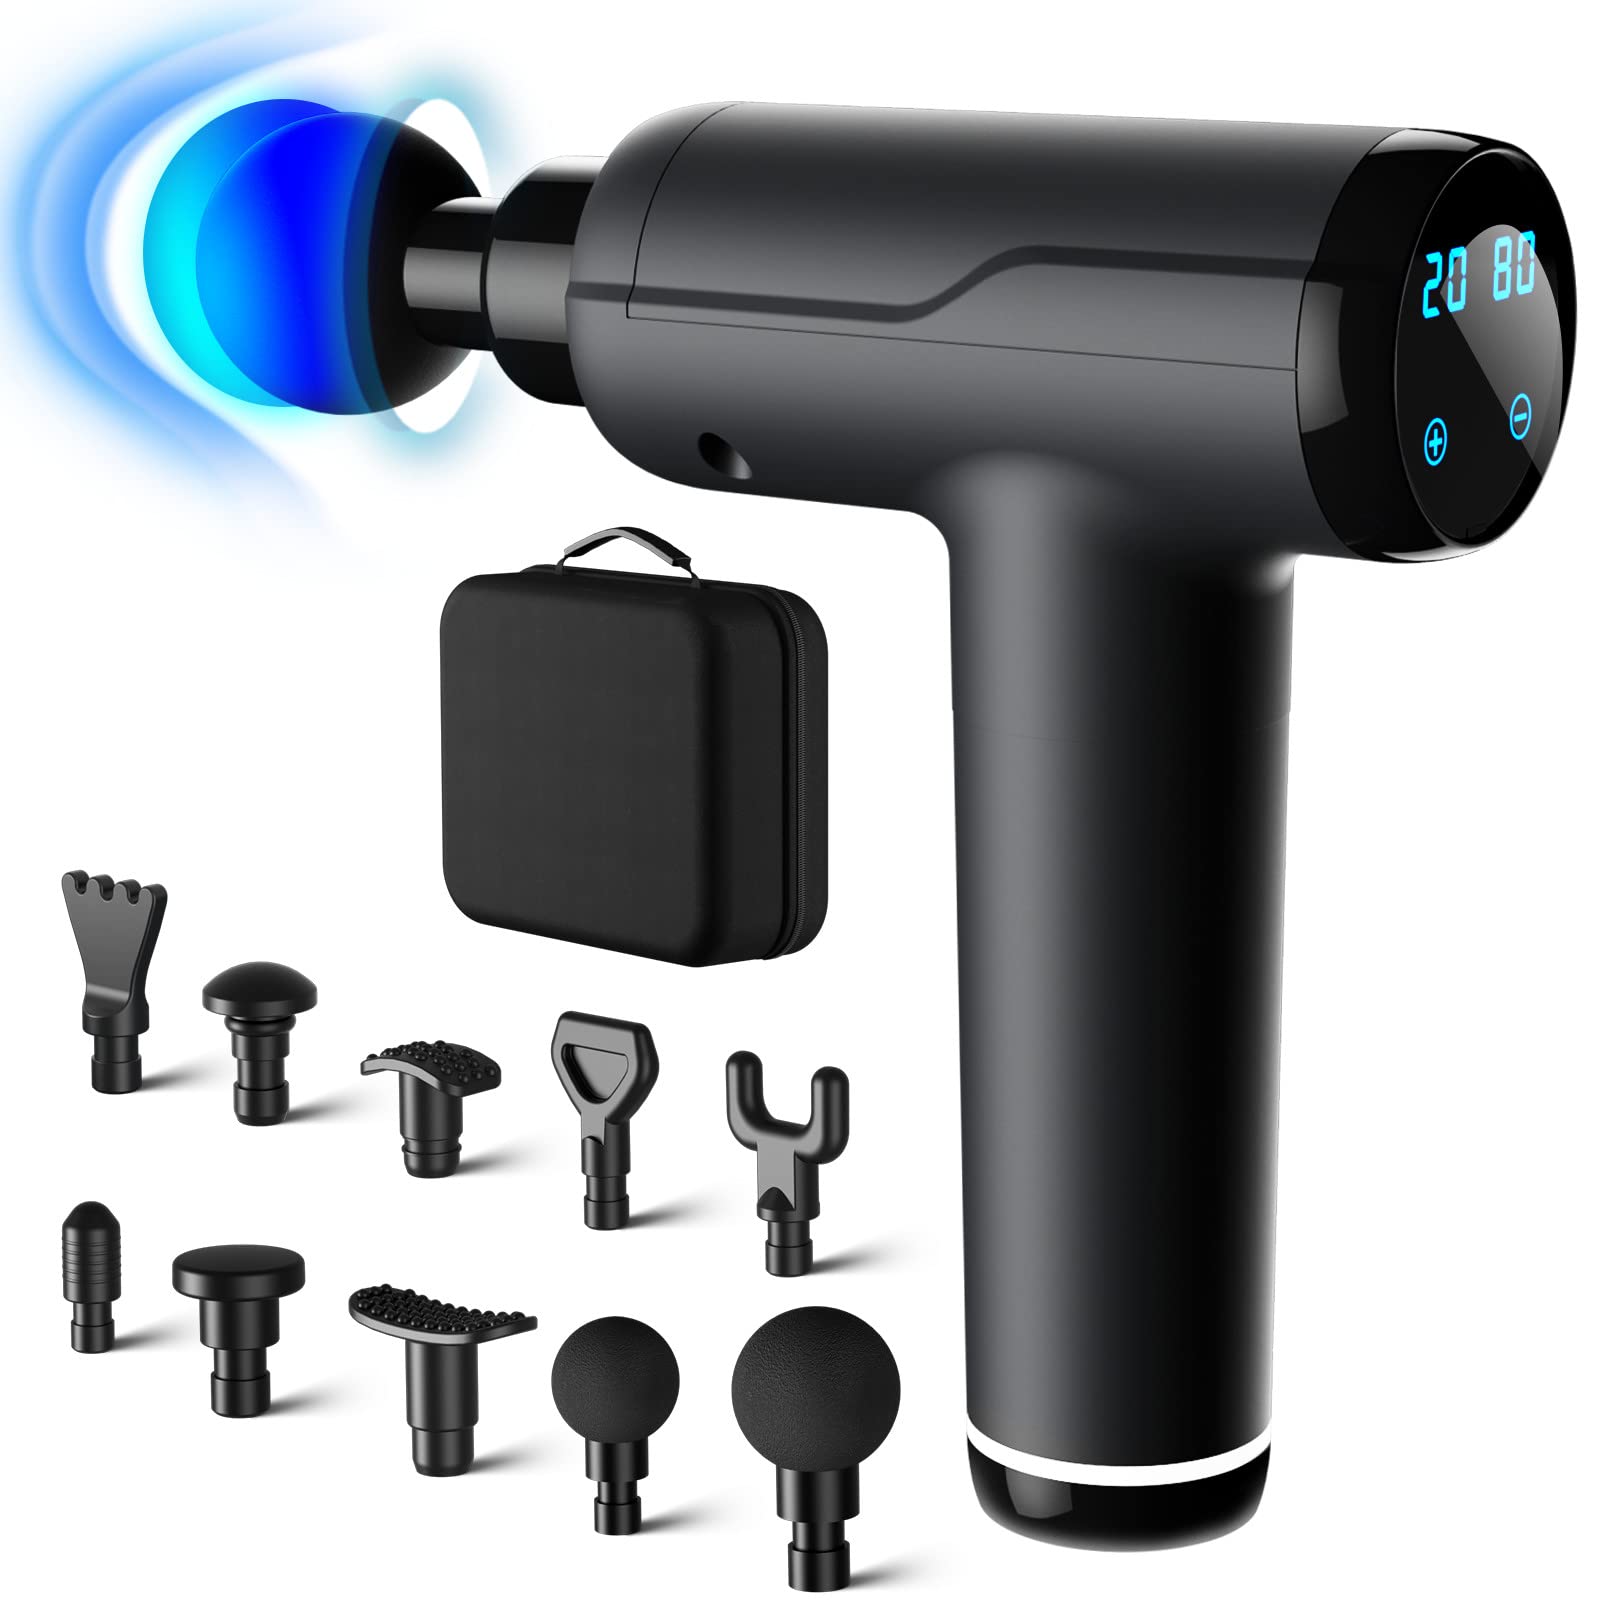 Massage Gun, Portable Muscle Massage Device with 10 Massage Heads, 2021 Deep Tissue Massager 20 Speeds with LCD Touch Screen, Featuring Quiet Glide Technology, Powerful Cordless Percussion Handheld